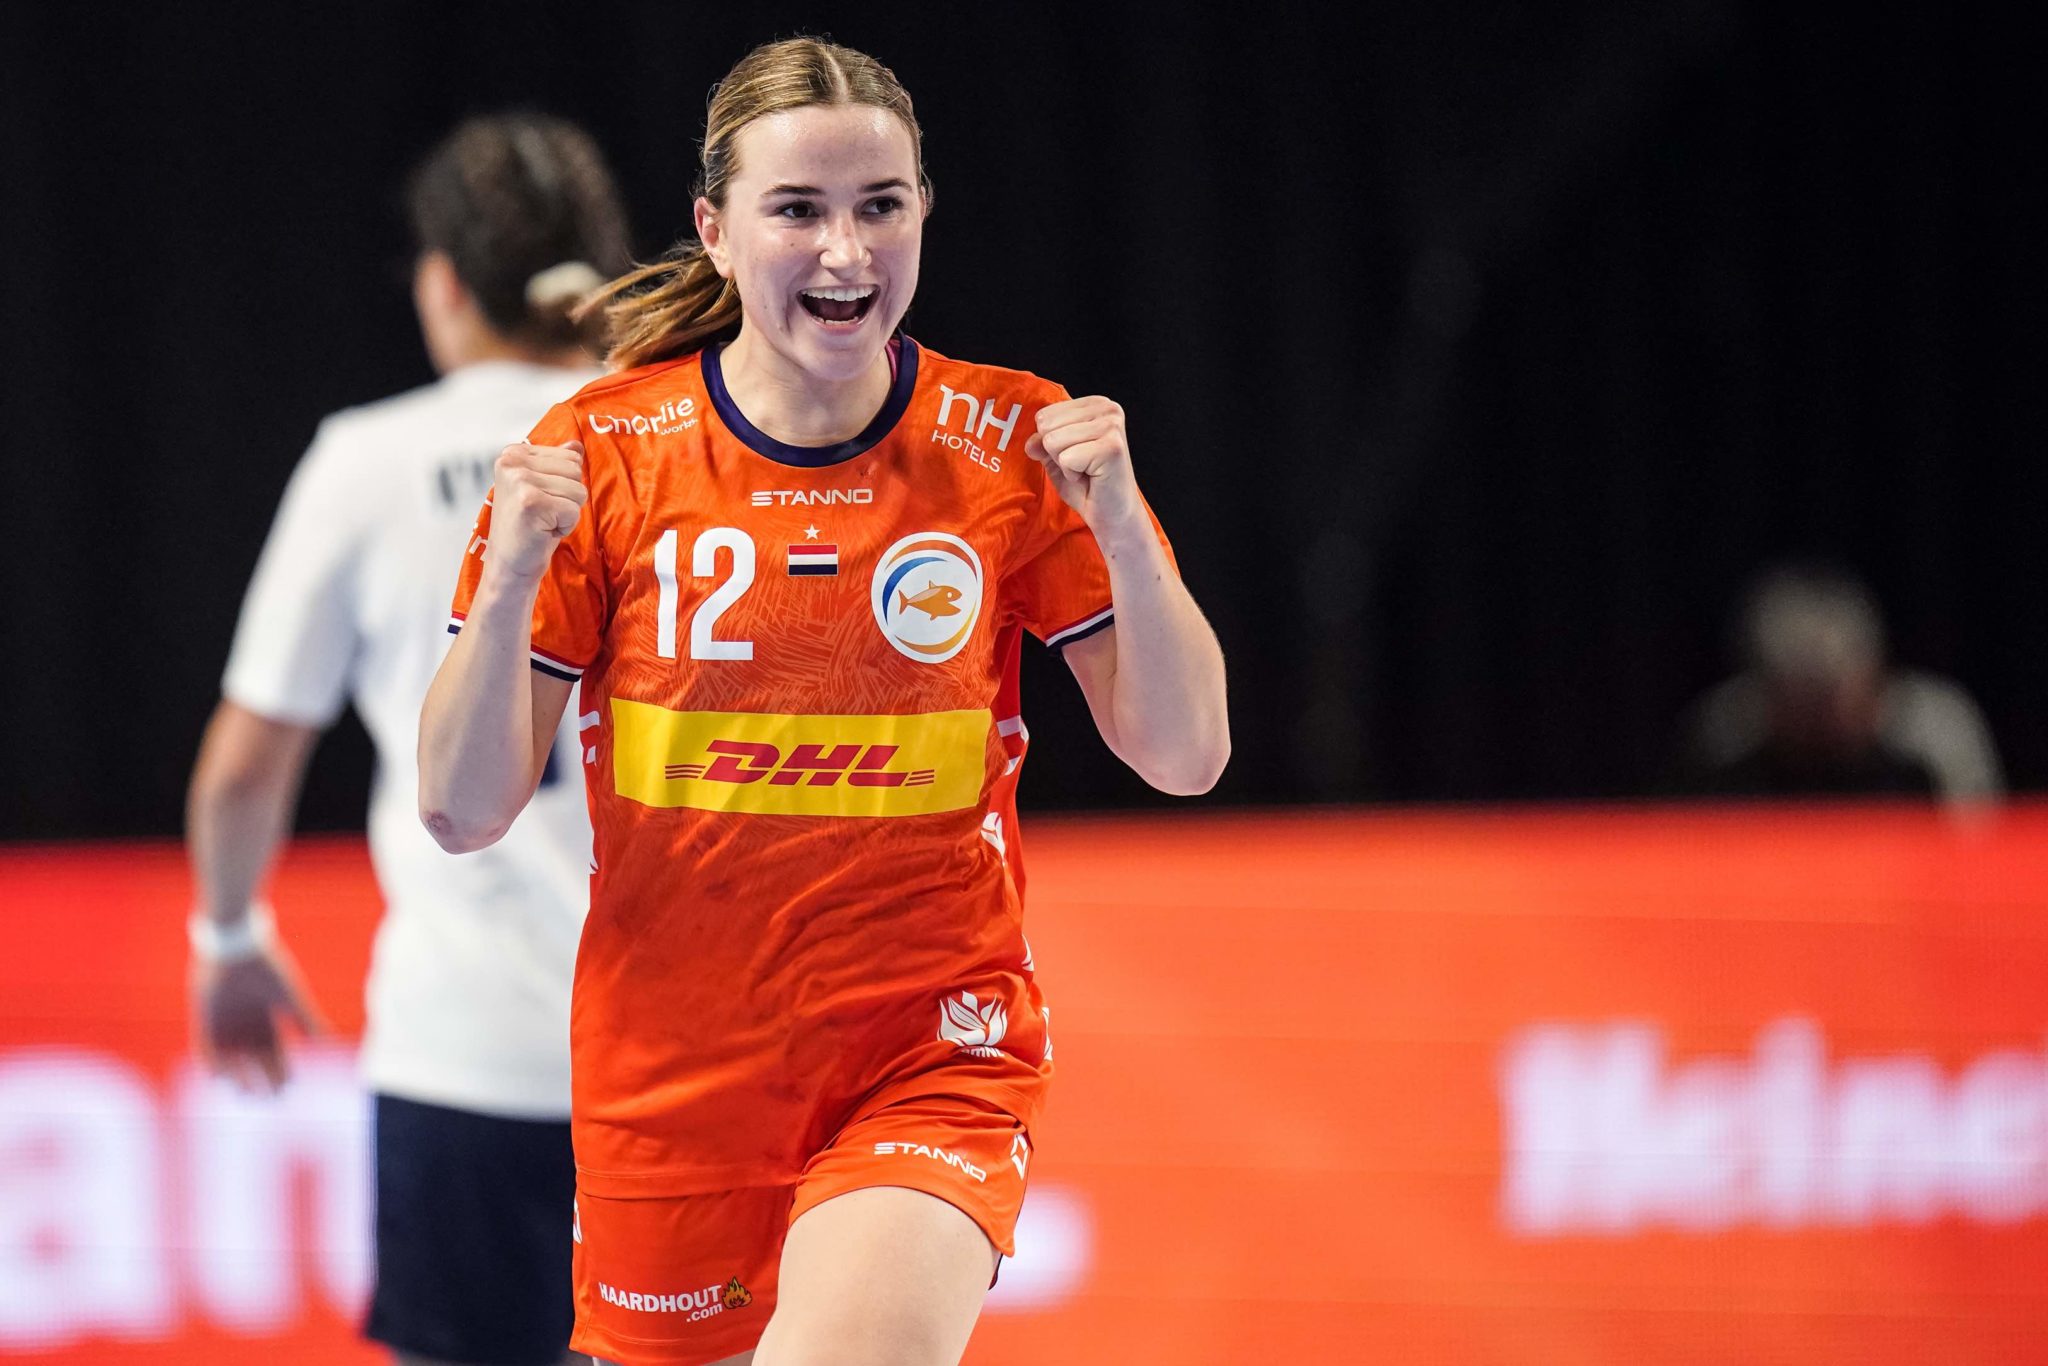 24-04-2022 HANDBAL:NEDERLAND-GRIEKENLAND:ALMERE
Bo Van Wetering Of The Netherlands During The EHF EURO 2022 Qualifiers Phase 2 Match Between Netherlands And Greece At Topsportcentrum Almere On April 24, 2022 In Almere, Netherlands (Photo By Henk Seppen)